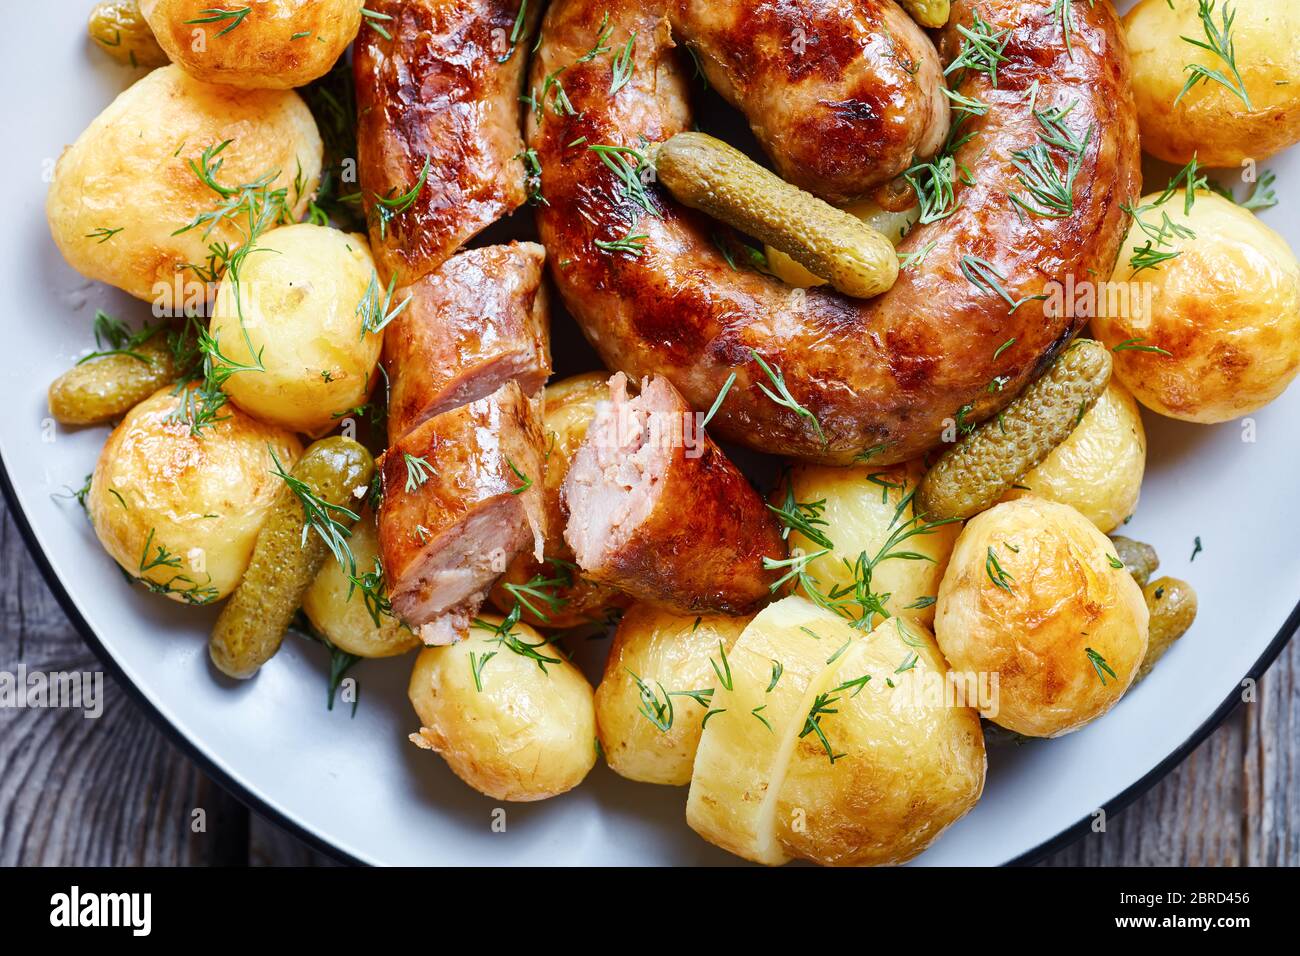 German food: new potato boiled and fried, served with round sausage and pickled cucumbers, sprinkled with fresh dill, served on a plate on an old wood Stock Photo